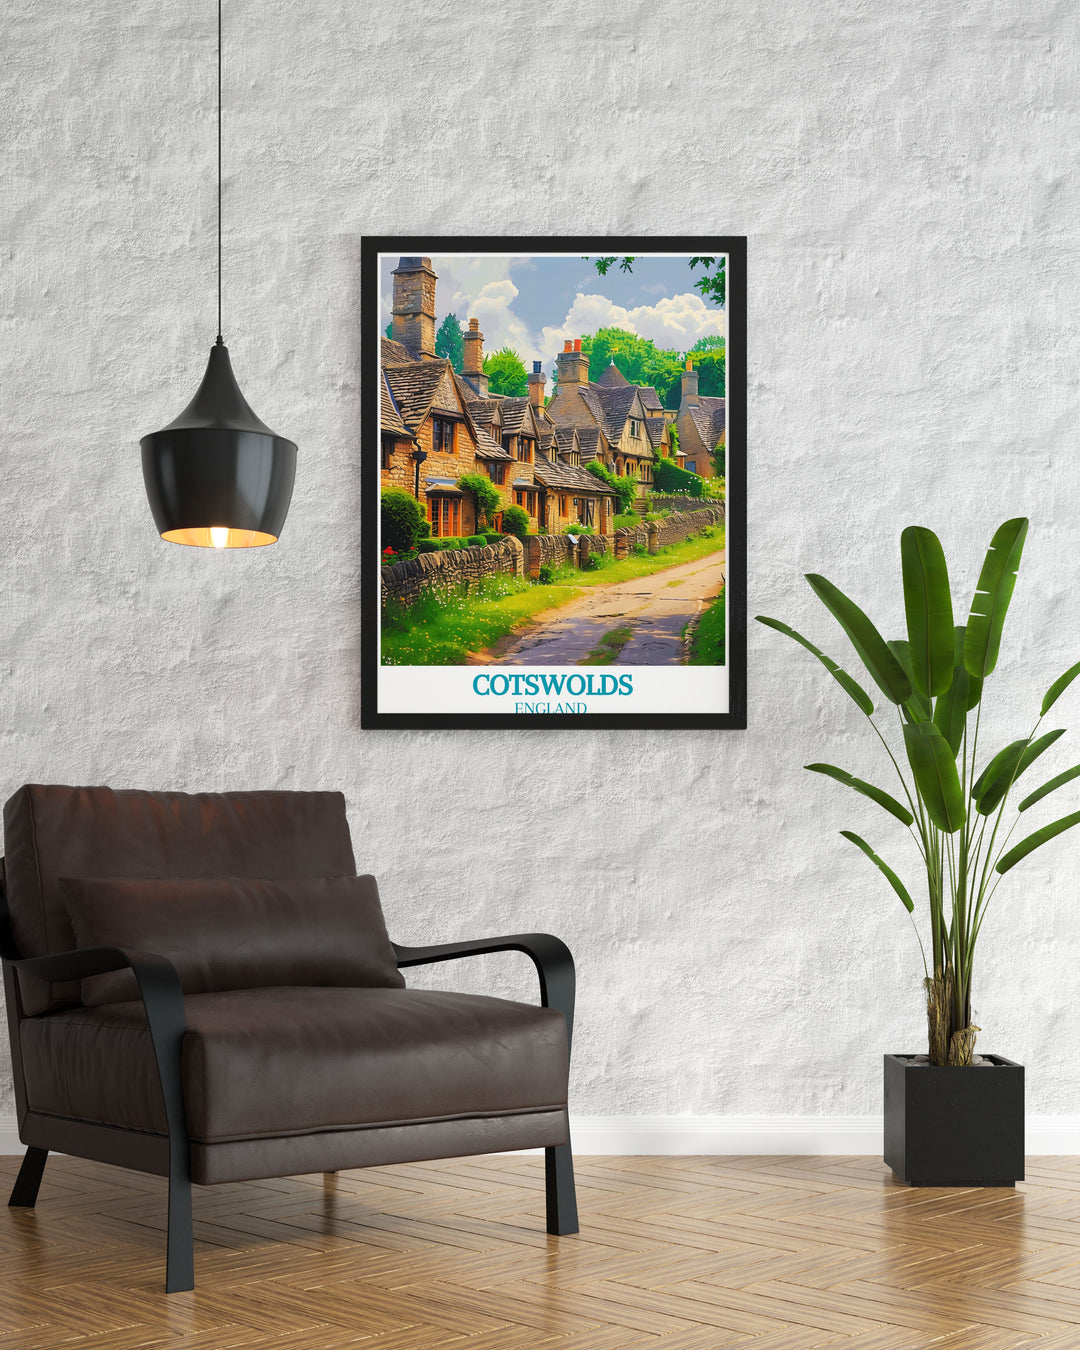 Discover the picturesque village of Bibury in the Cotswolds with a detailed art print showcasing its honey colored stone cottages and lush greenery, perfect for adding a touch of English charm to your decor.